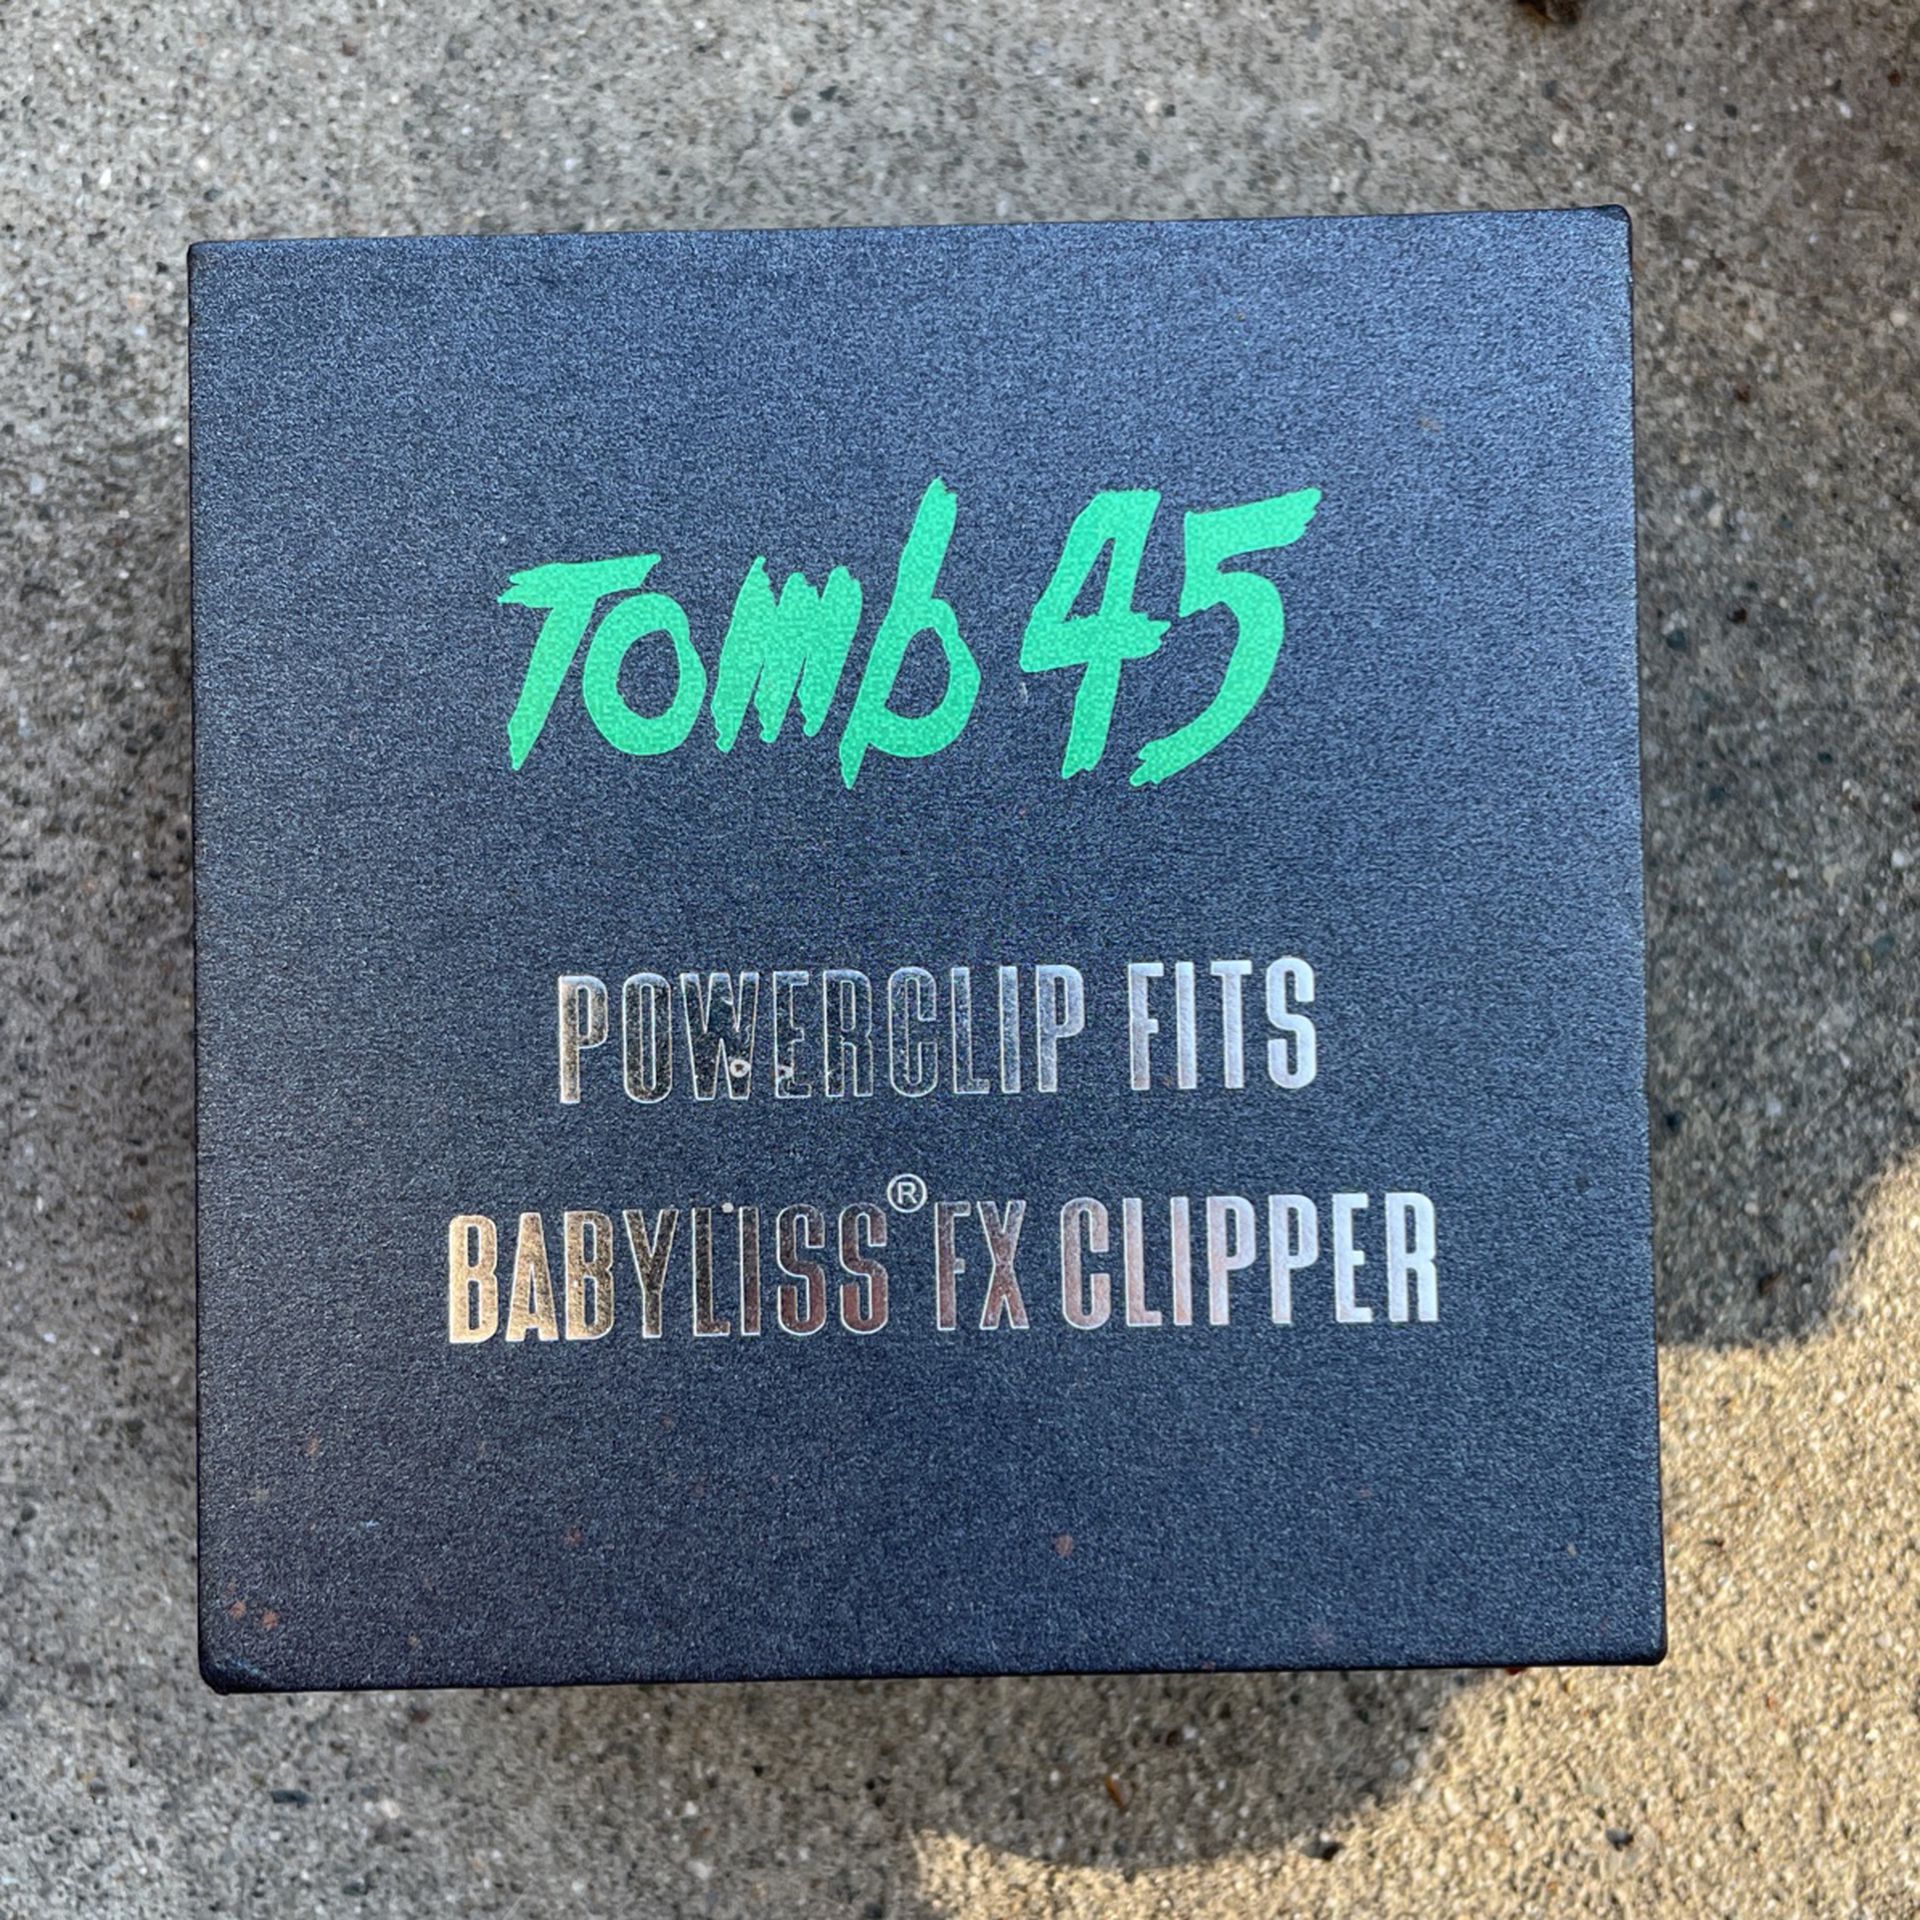 Tomb 45 Power clip Babyliss FX Clipper